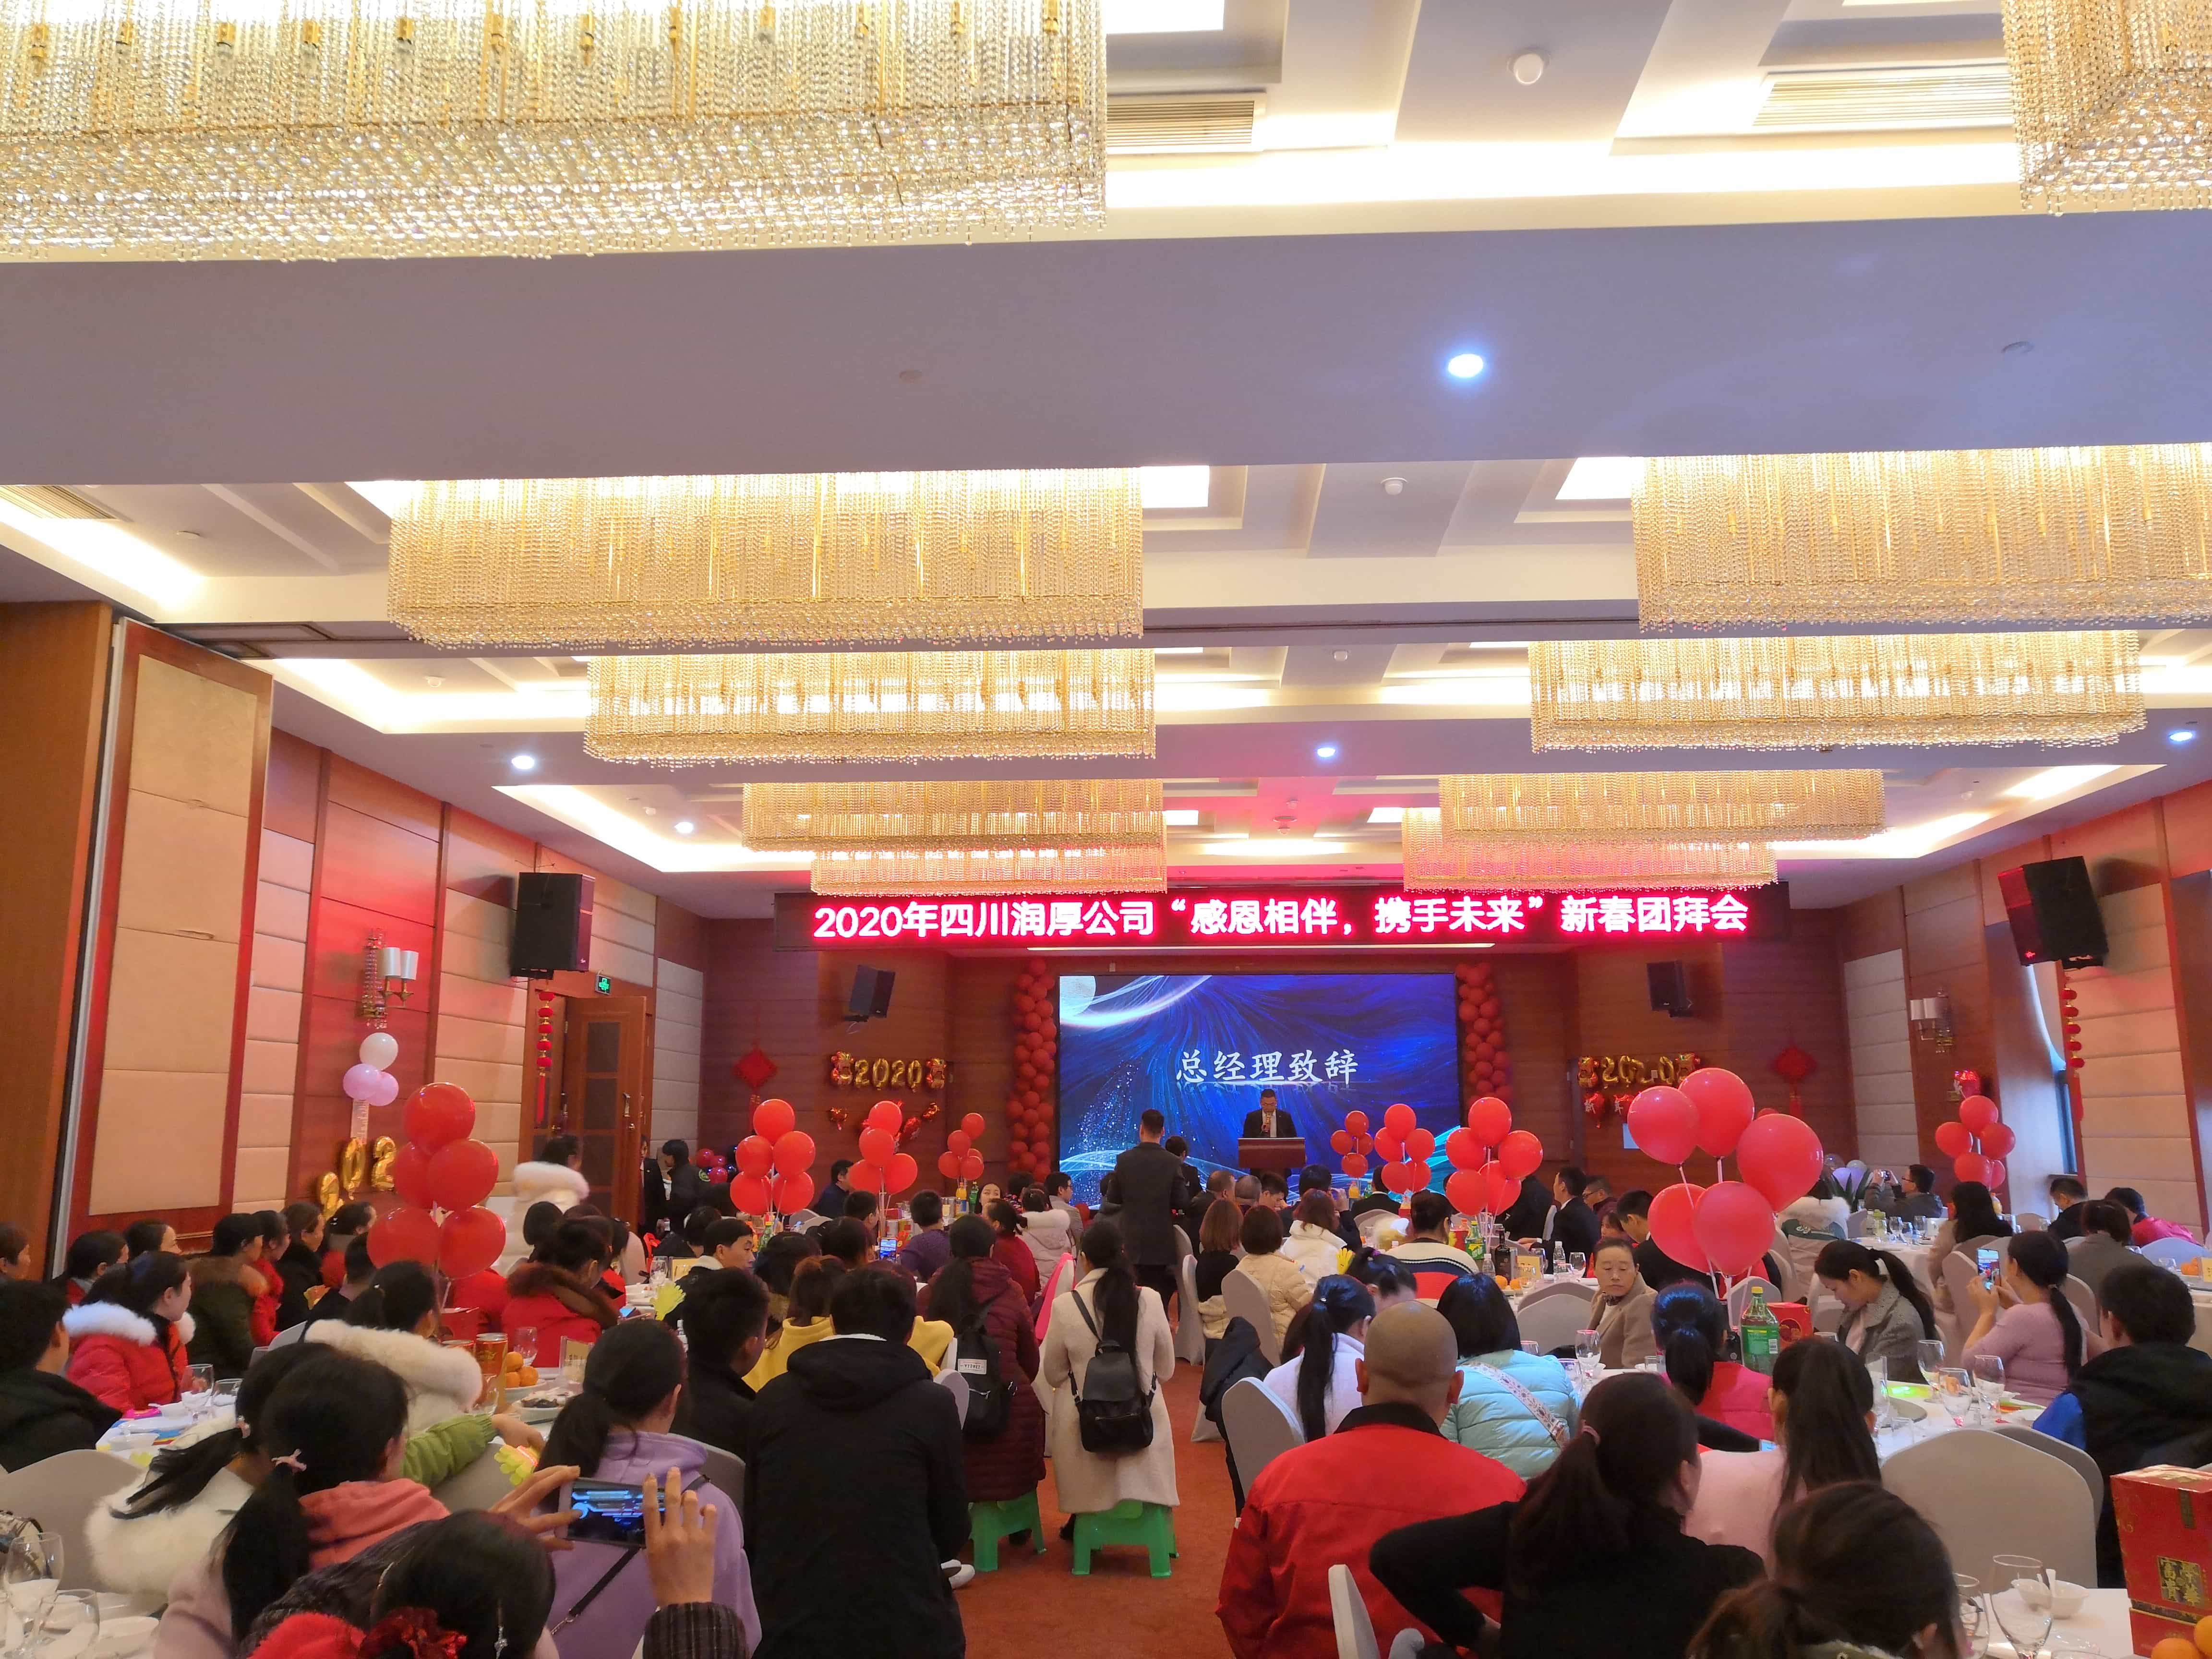 2020-01-13 2019 Chinese New Year's Annual Gala of Realhoub Special Fiber Co., Ltd. Successfully Concluded